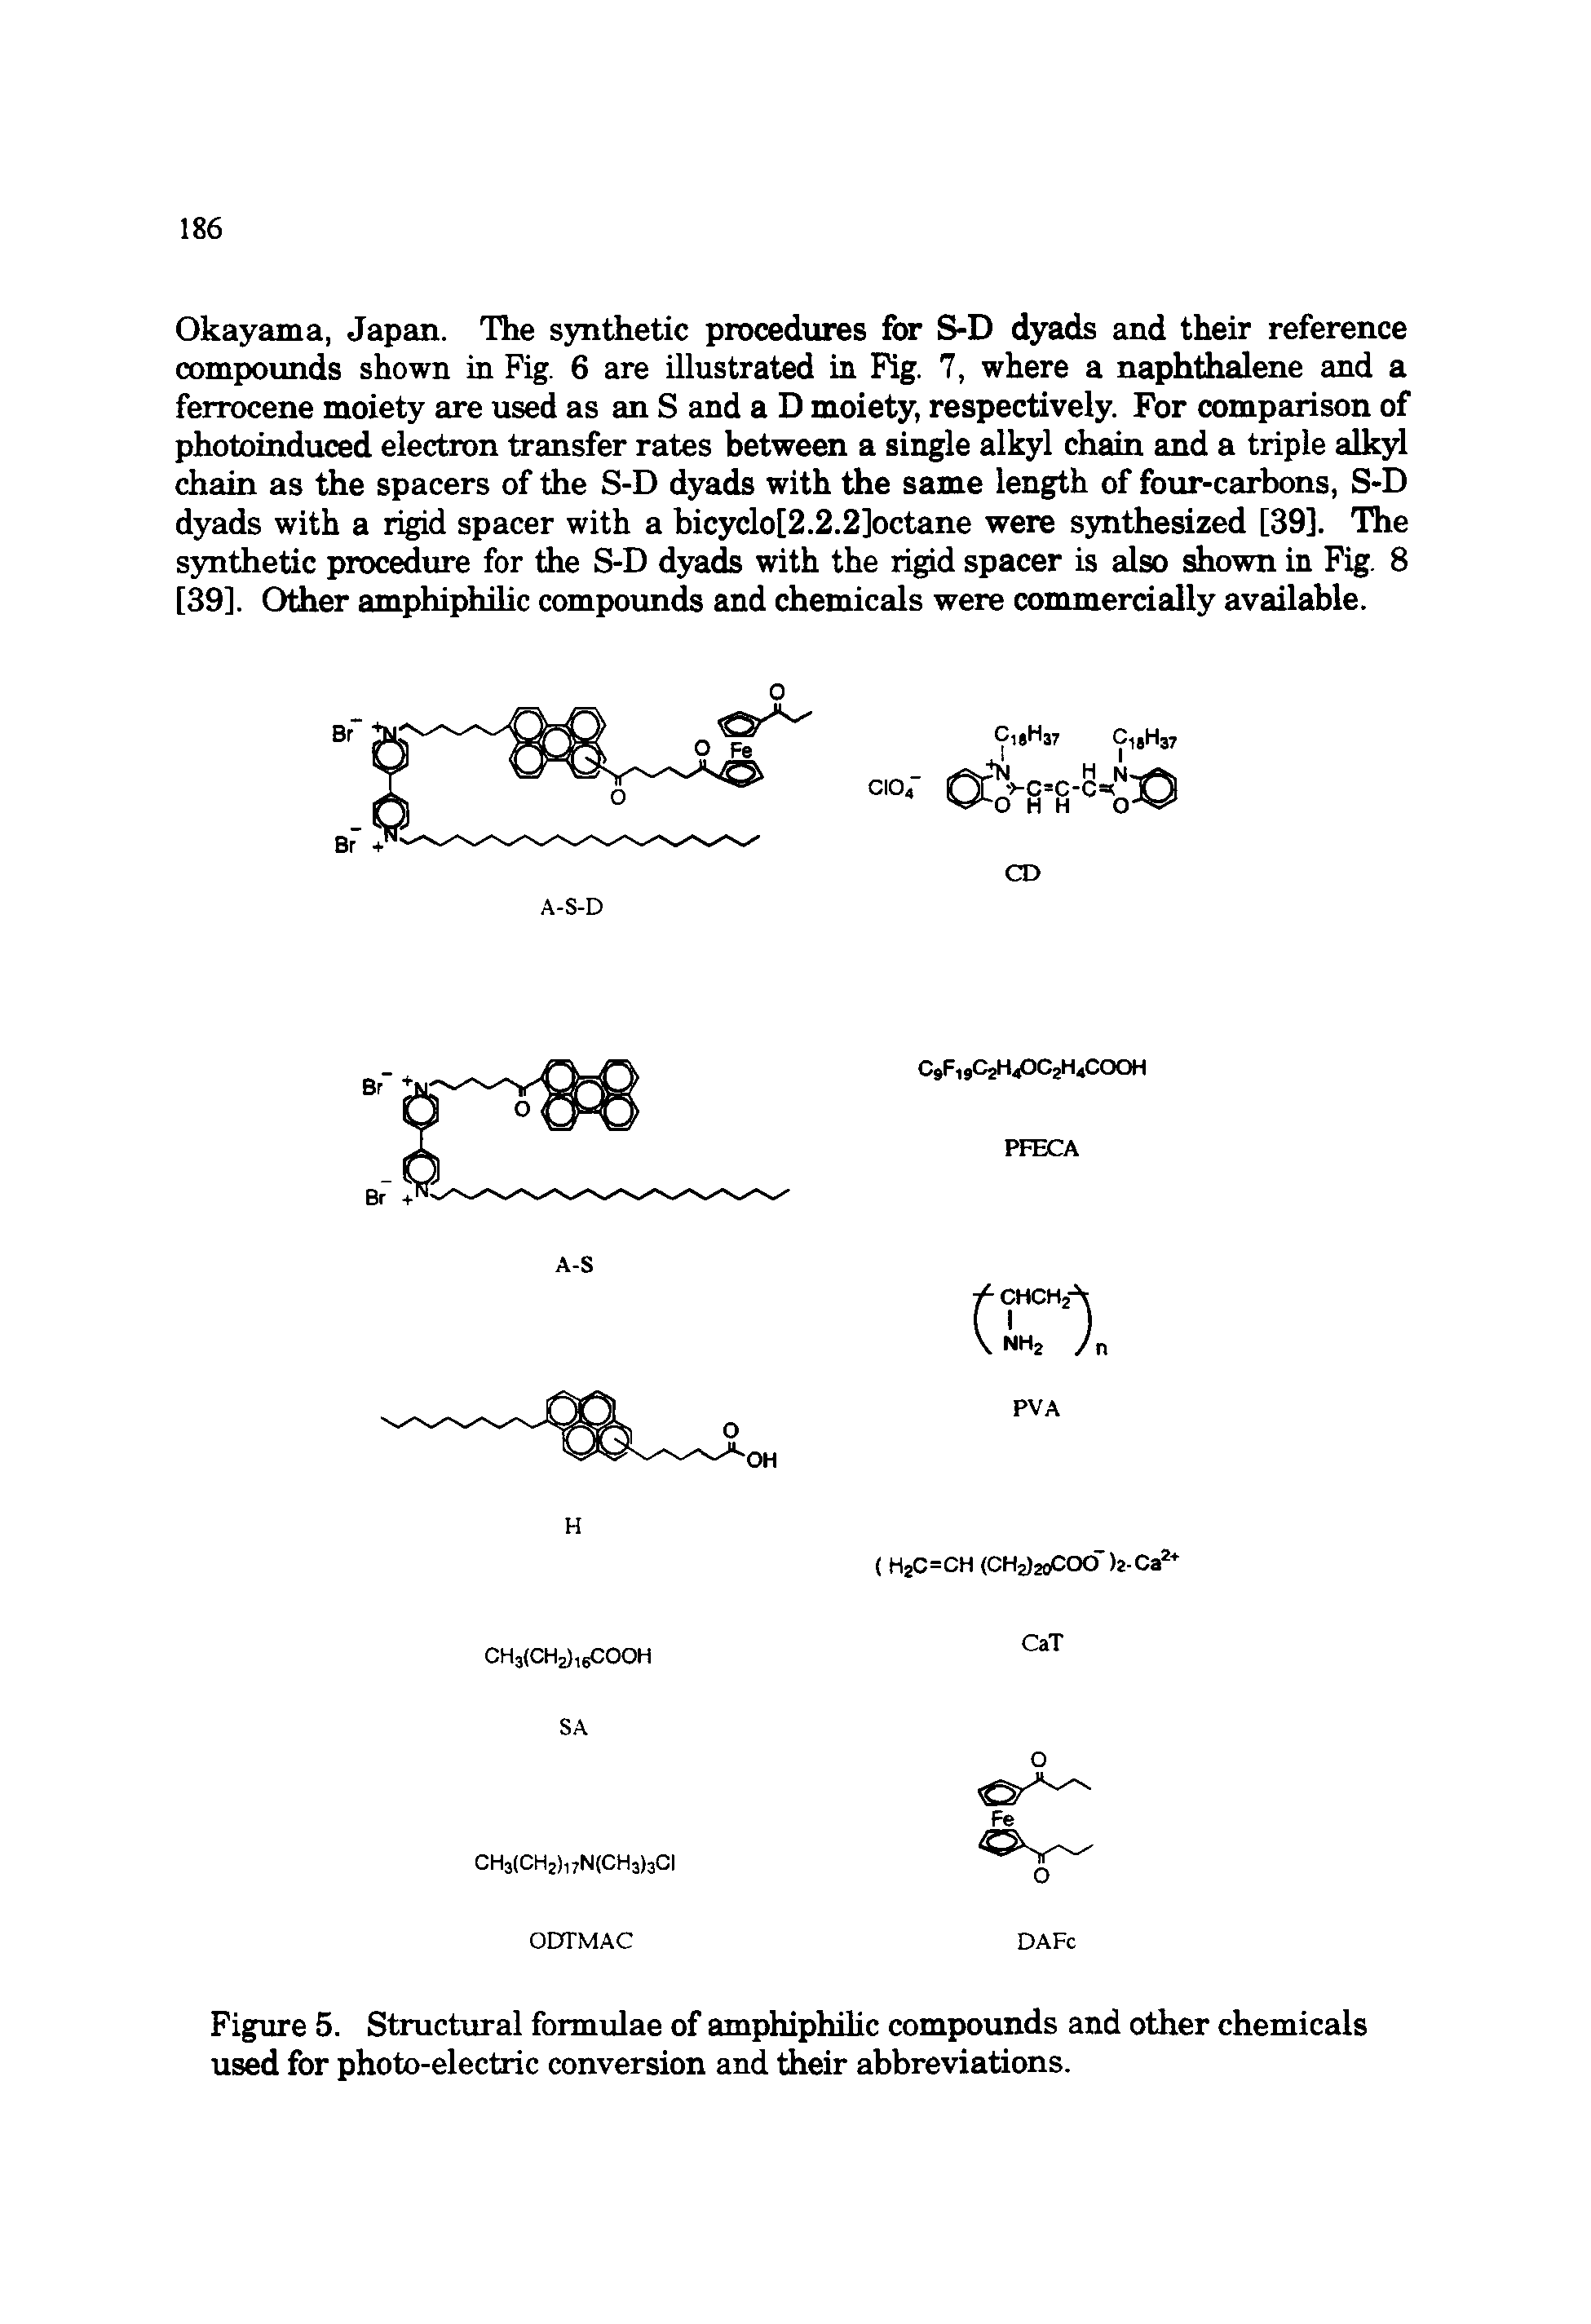 Figure 5. Structural formulae of amphiphilic compounds and other chemicals used for photo-electric conversion and their abbreviations.